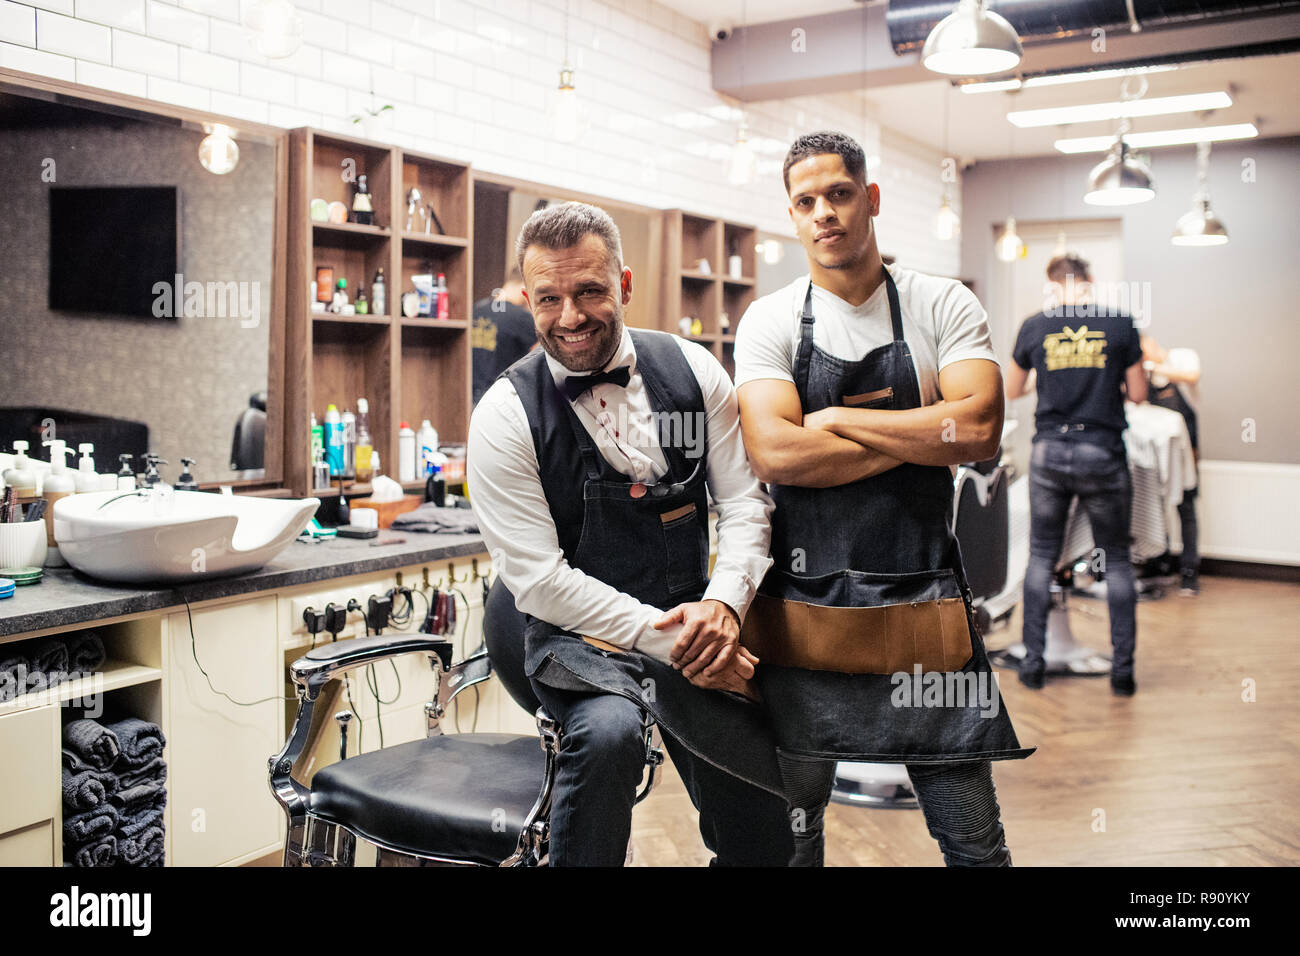 Two male haidressers and hairstylists sitting in barber shop, posing for a photograph. Stock Photo